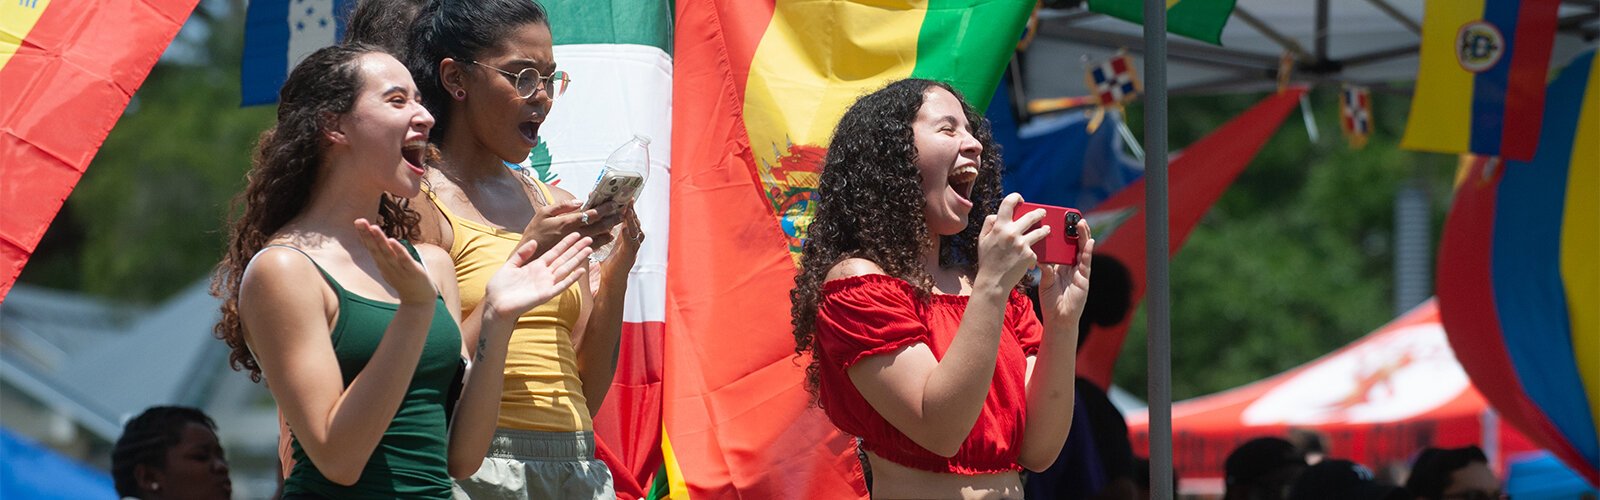 Thalia Cortes, 19, Kathia Mackey, 26, and Britney Colon, 20, all from HCC, applaud the performers on stage during the Multicultural Family Day event at Water Works Park on Sunday.